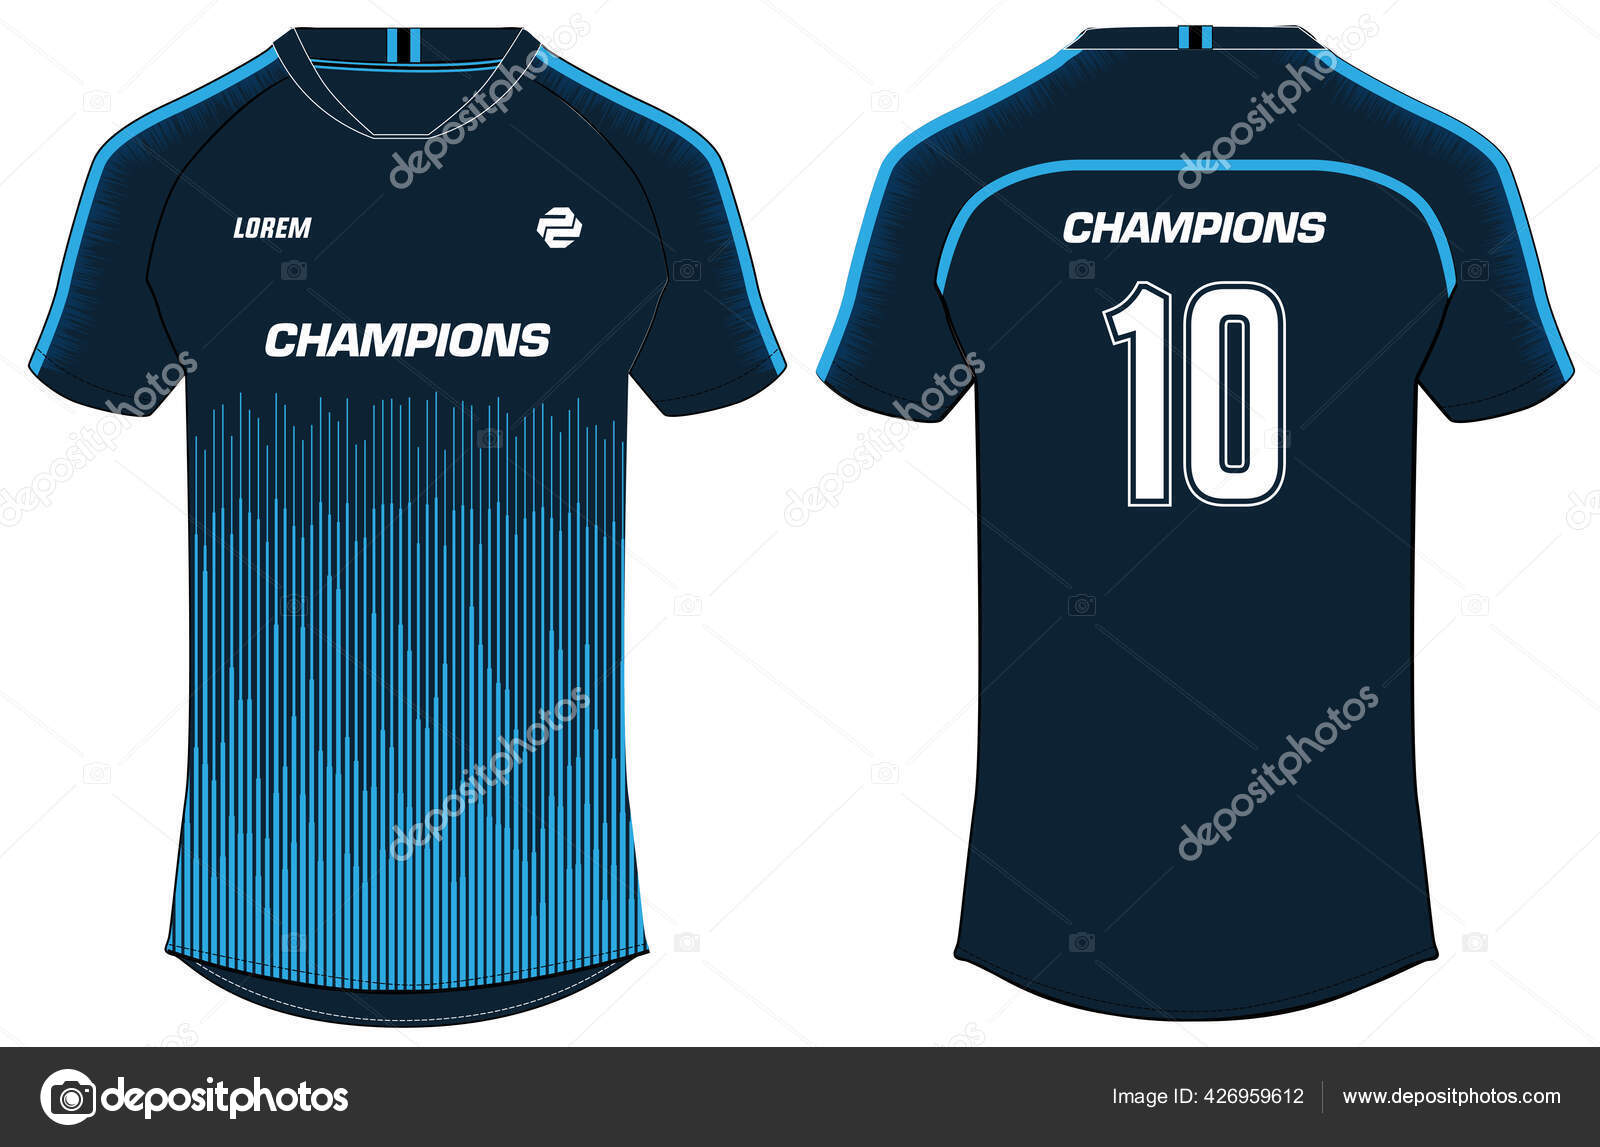 Download Sports Shirt Jersey Design Vector Template Sports Jersey Concept Front Vector Image By C Faalil Vector Stock 426959612